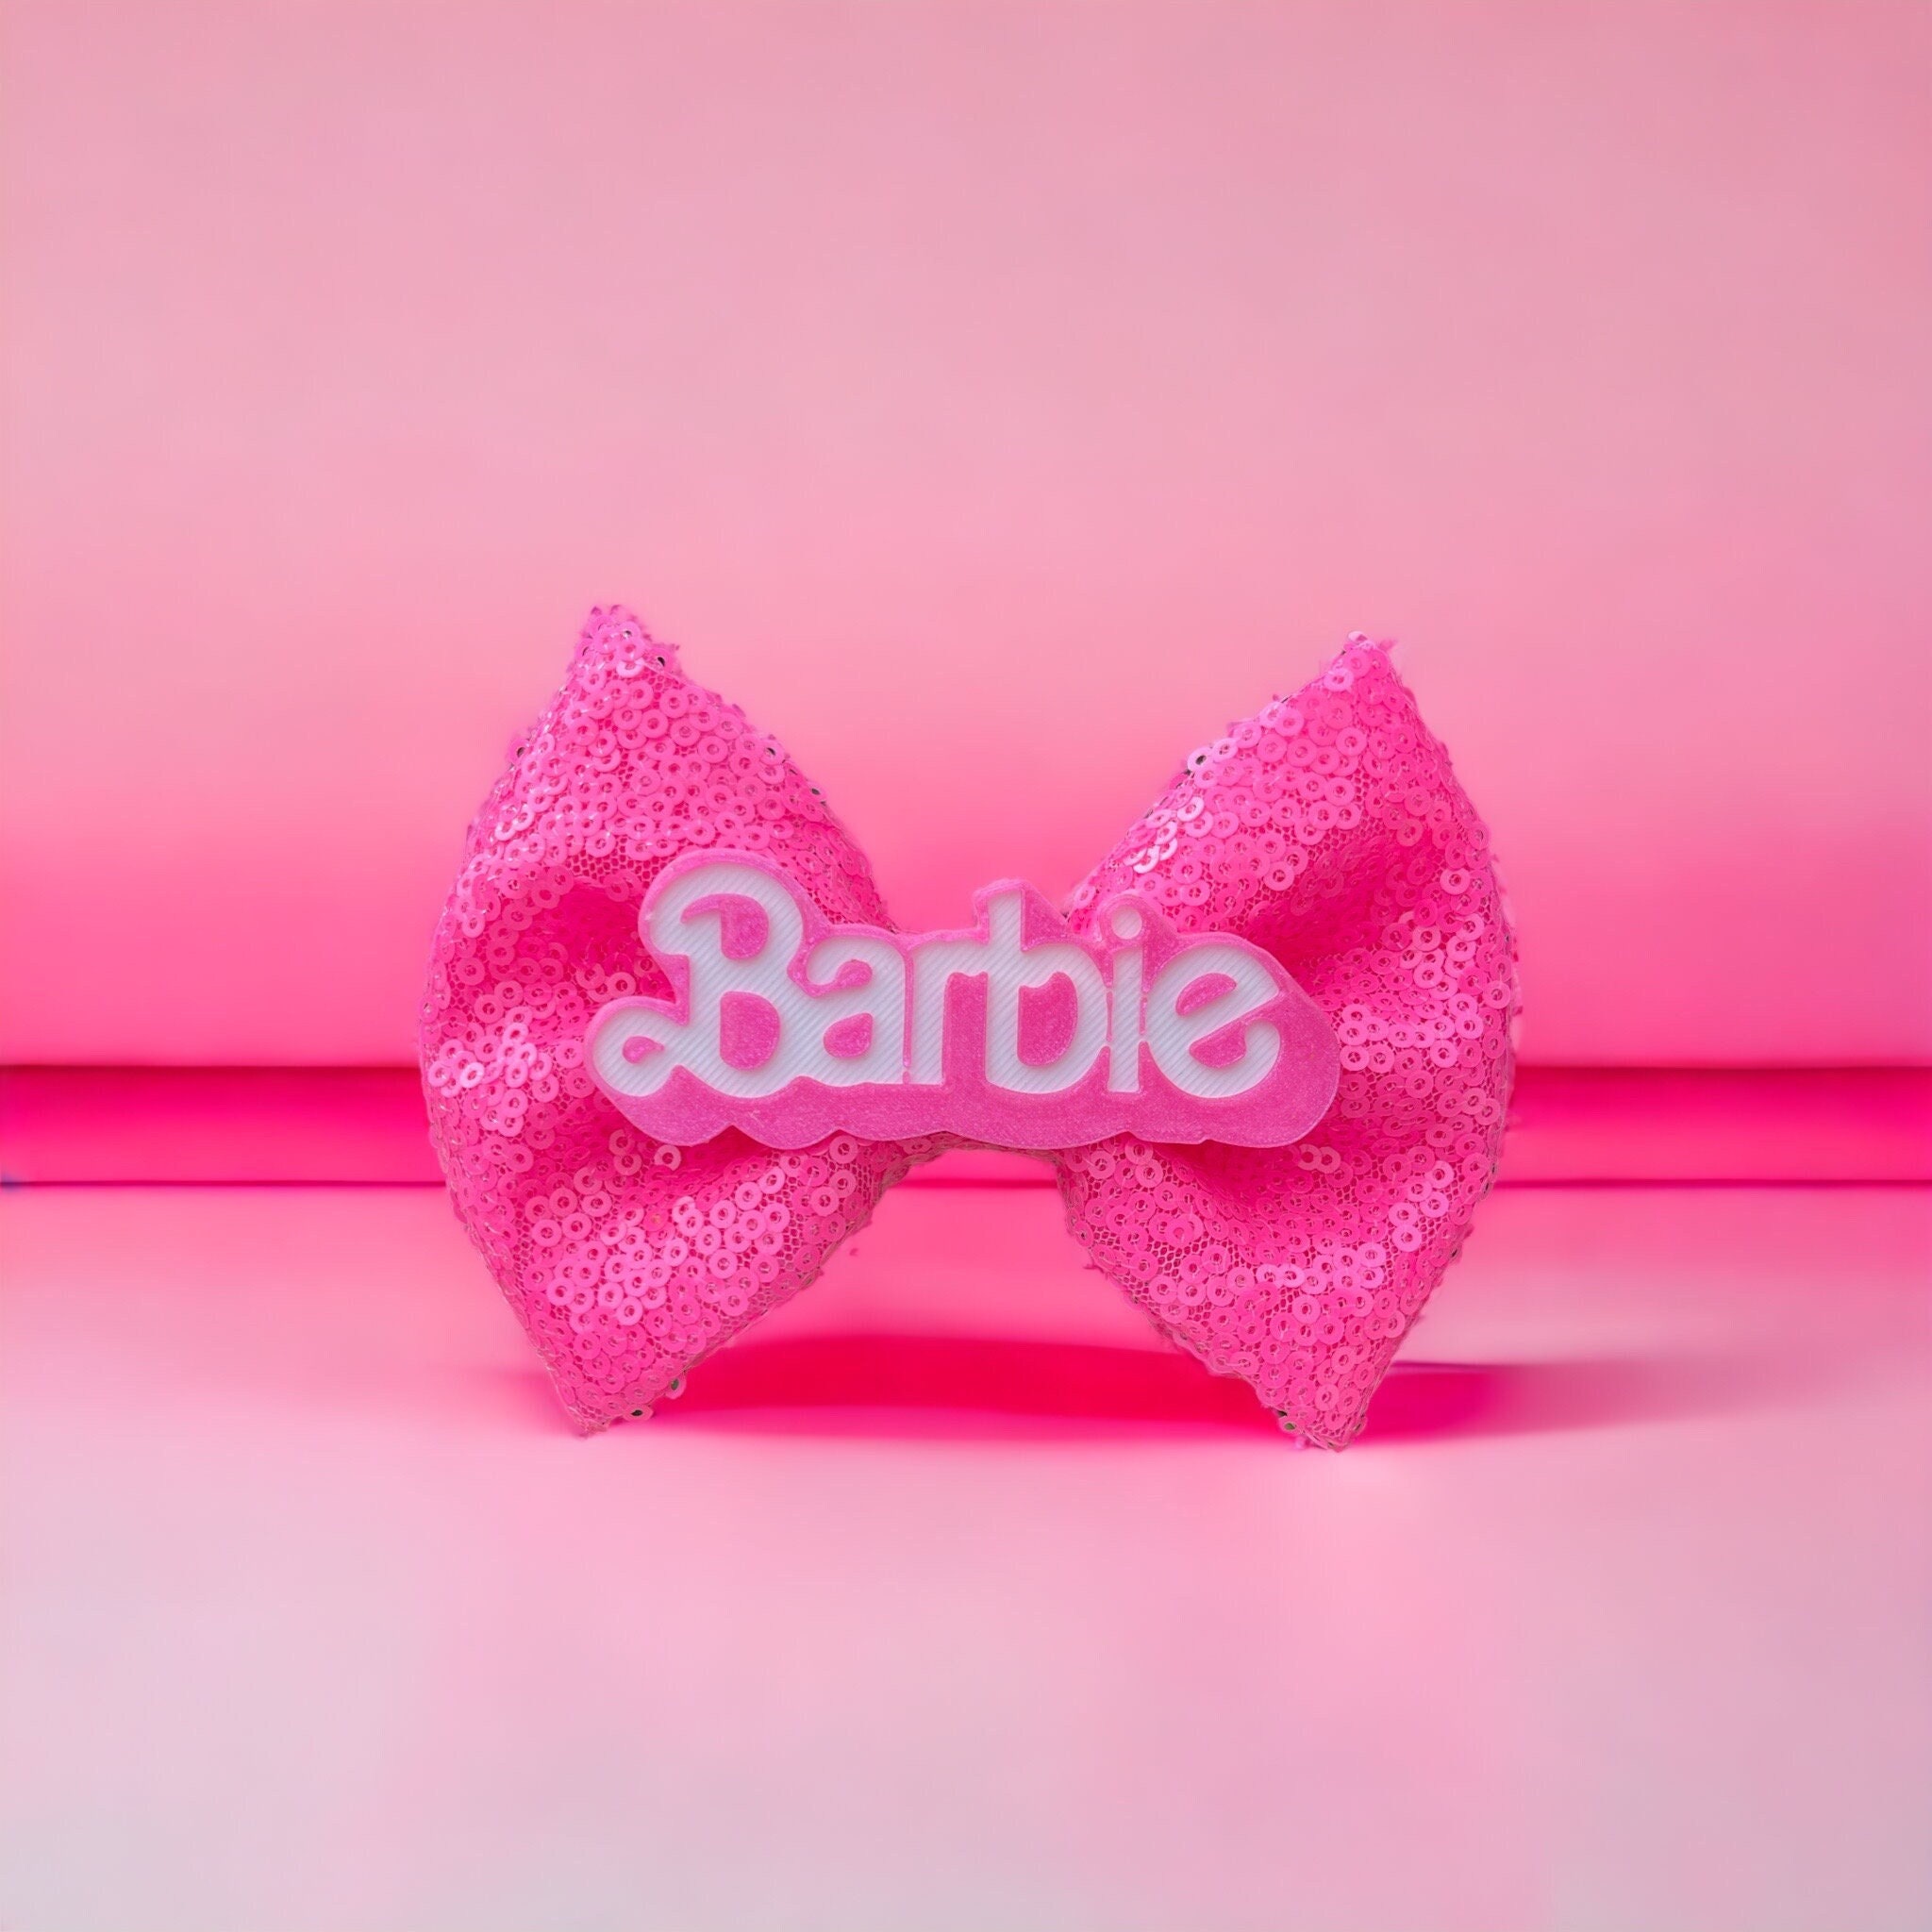 11.7k Likes, 73 Comments - Barbie® (@barbiestyle) on Instagram